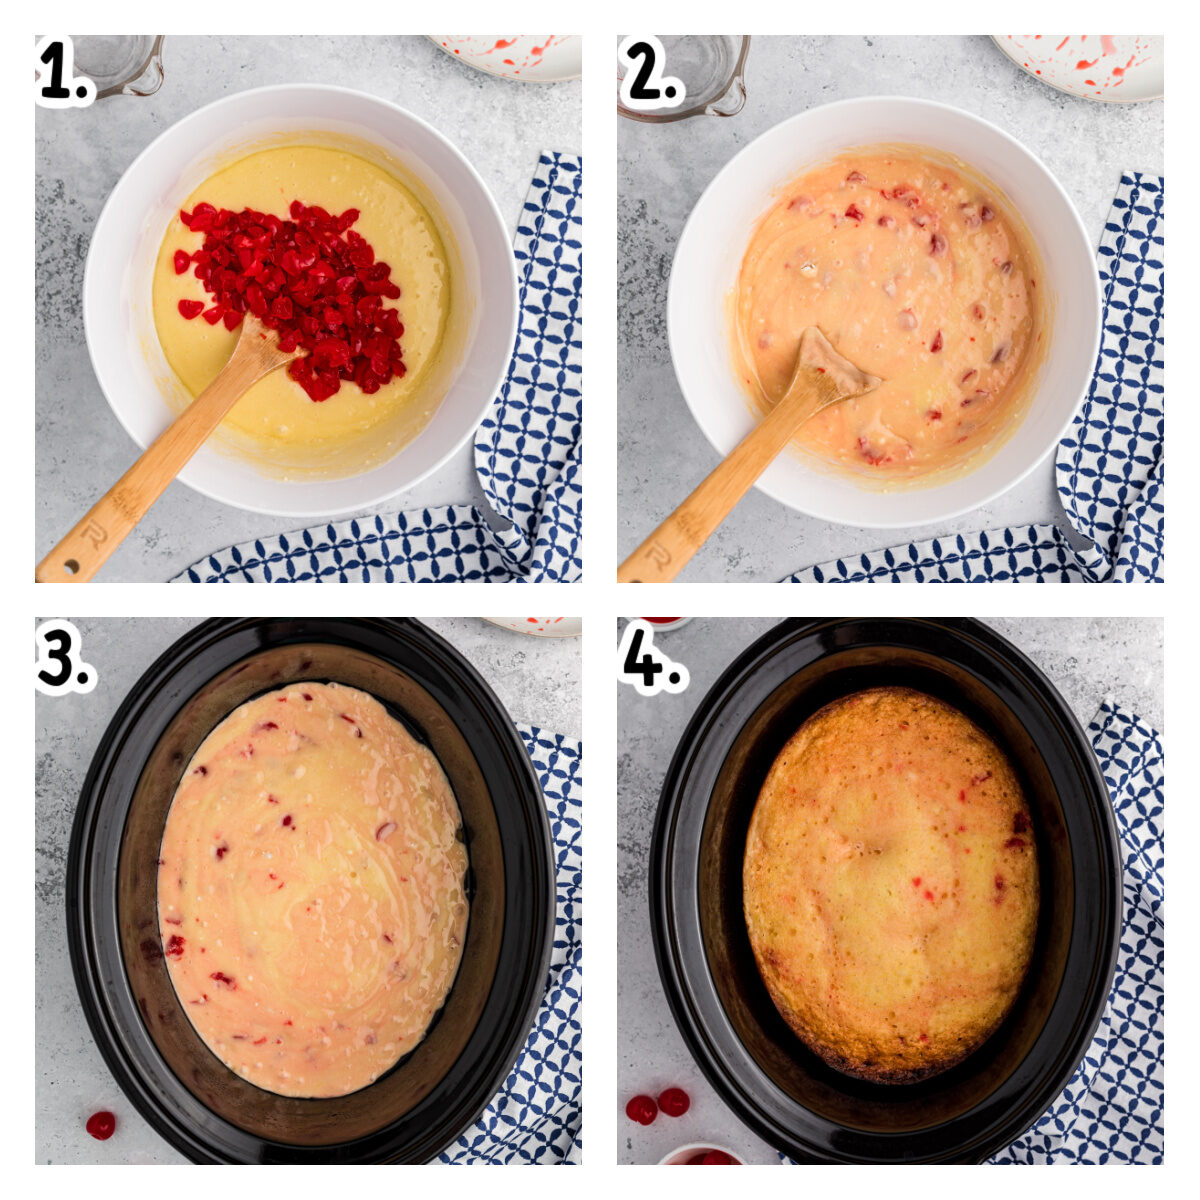 Four images showing how to cook a cake in a slow cooker.